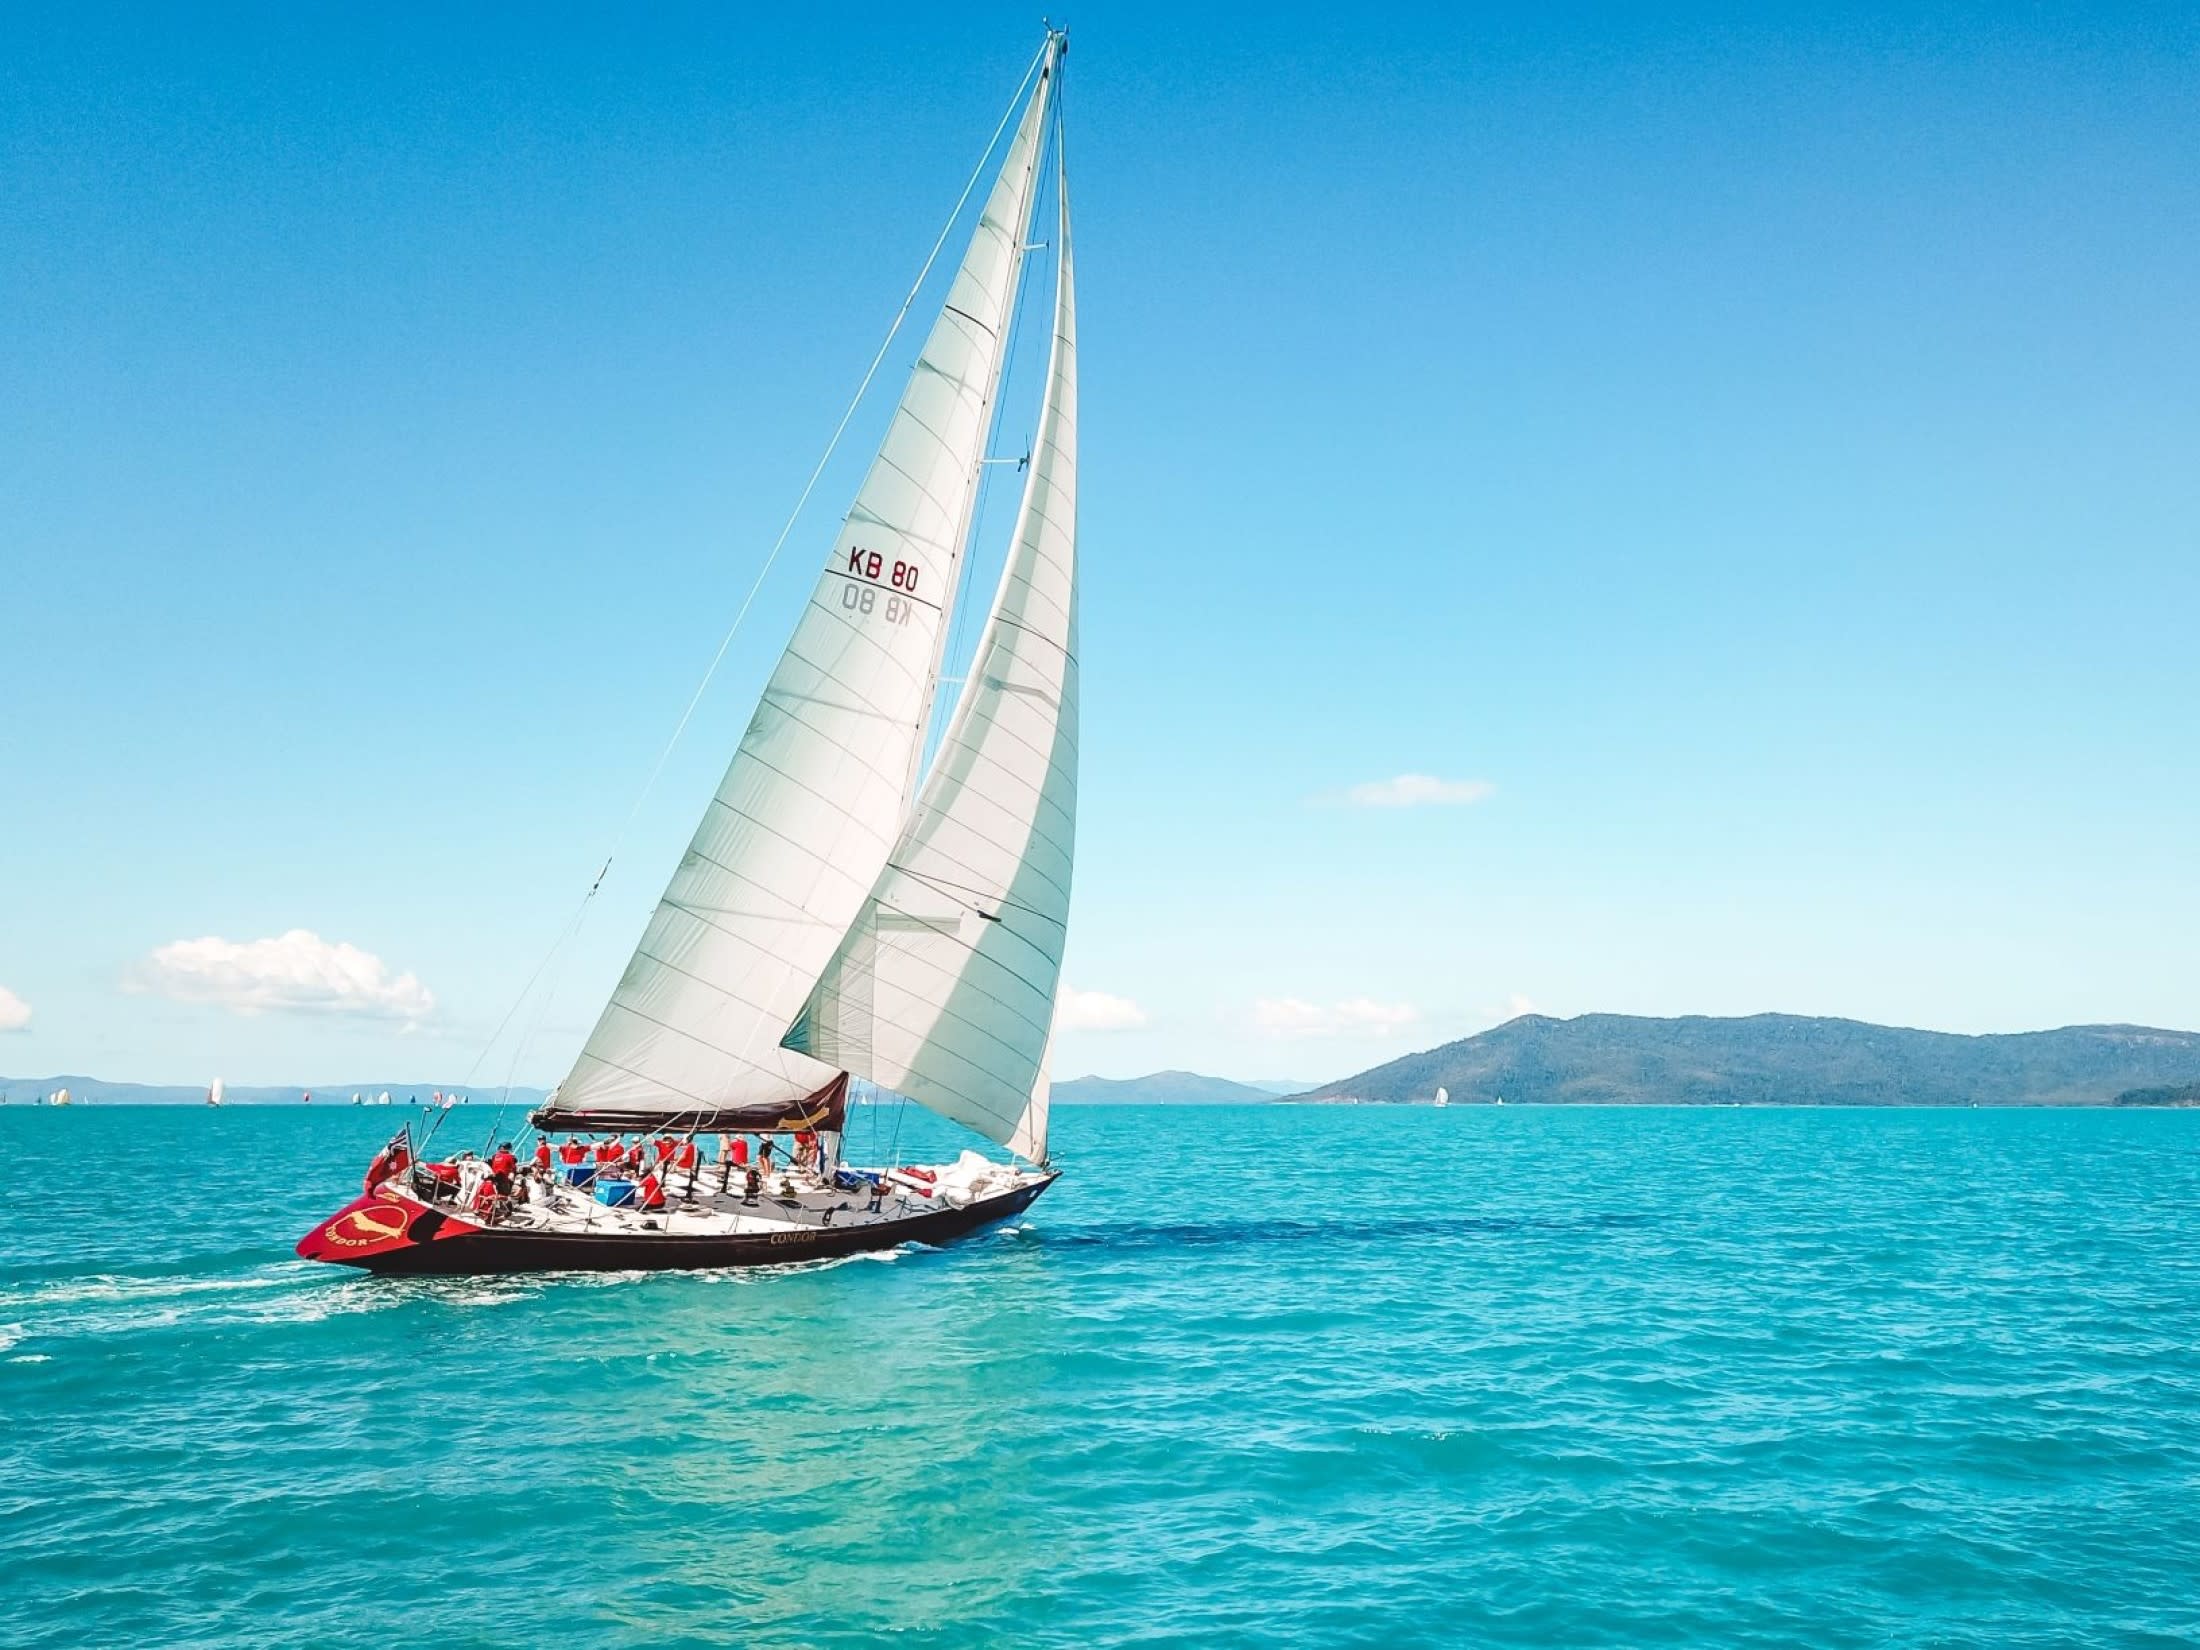 4 Days & 3 Nights Whitsunday Islands & Outer Reef Sailing Adventure on Condor